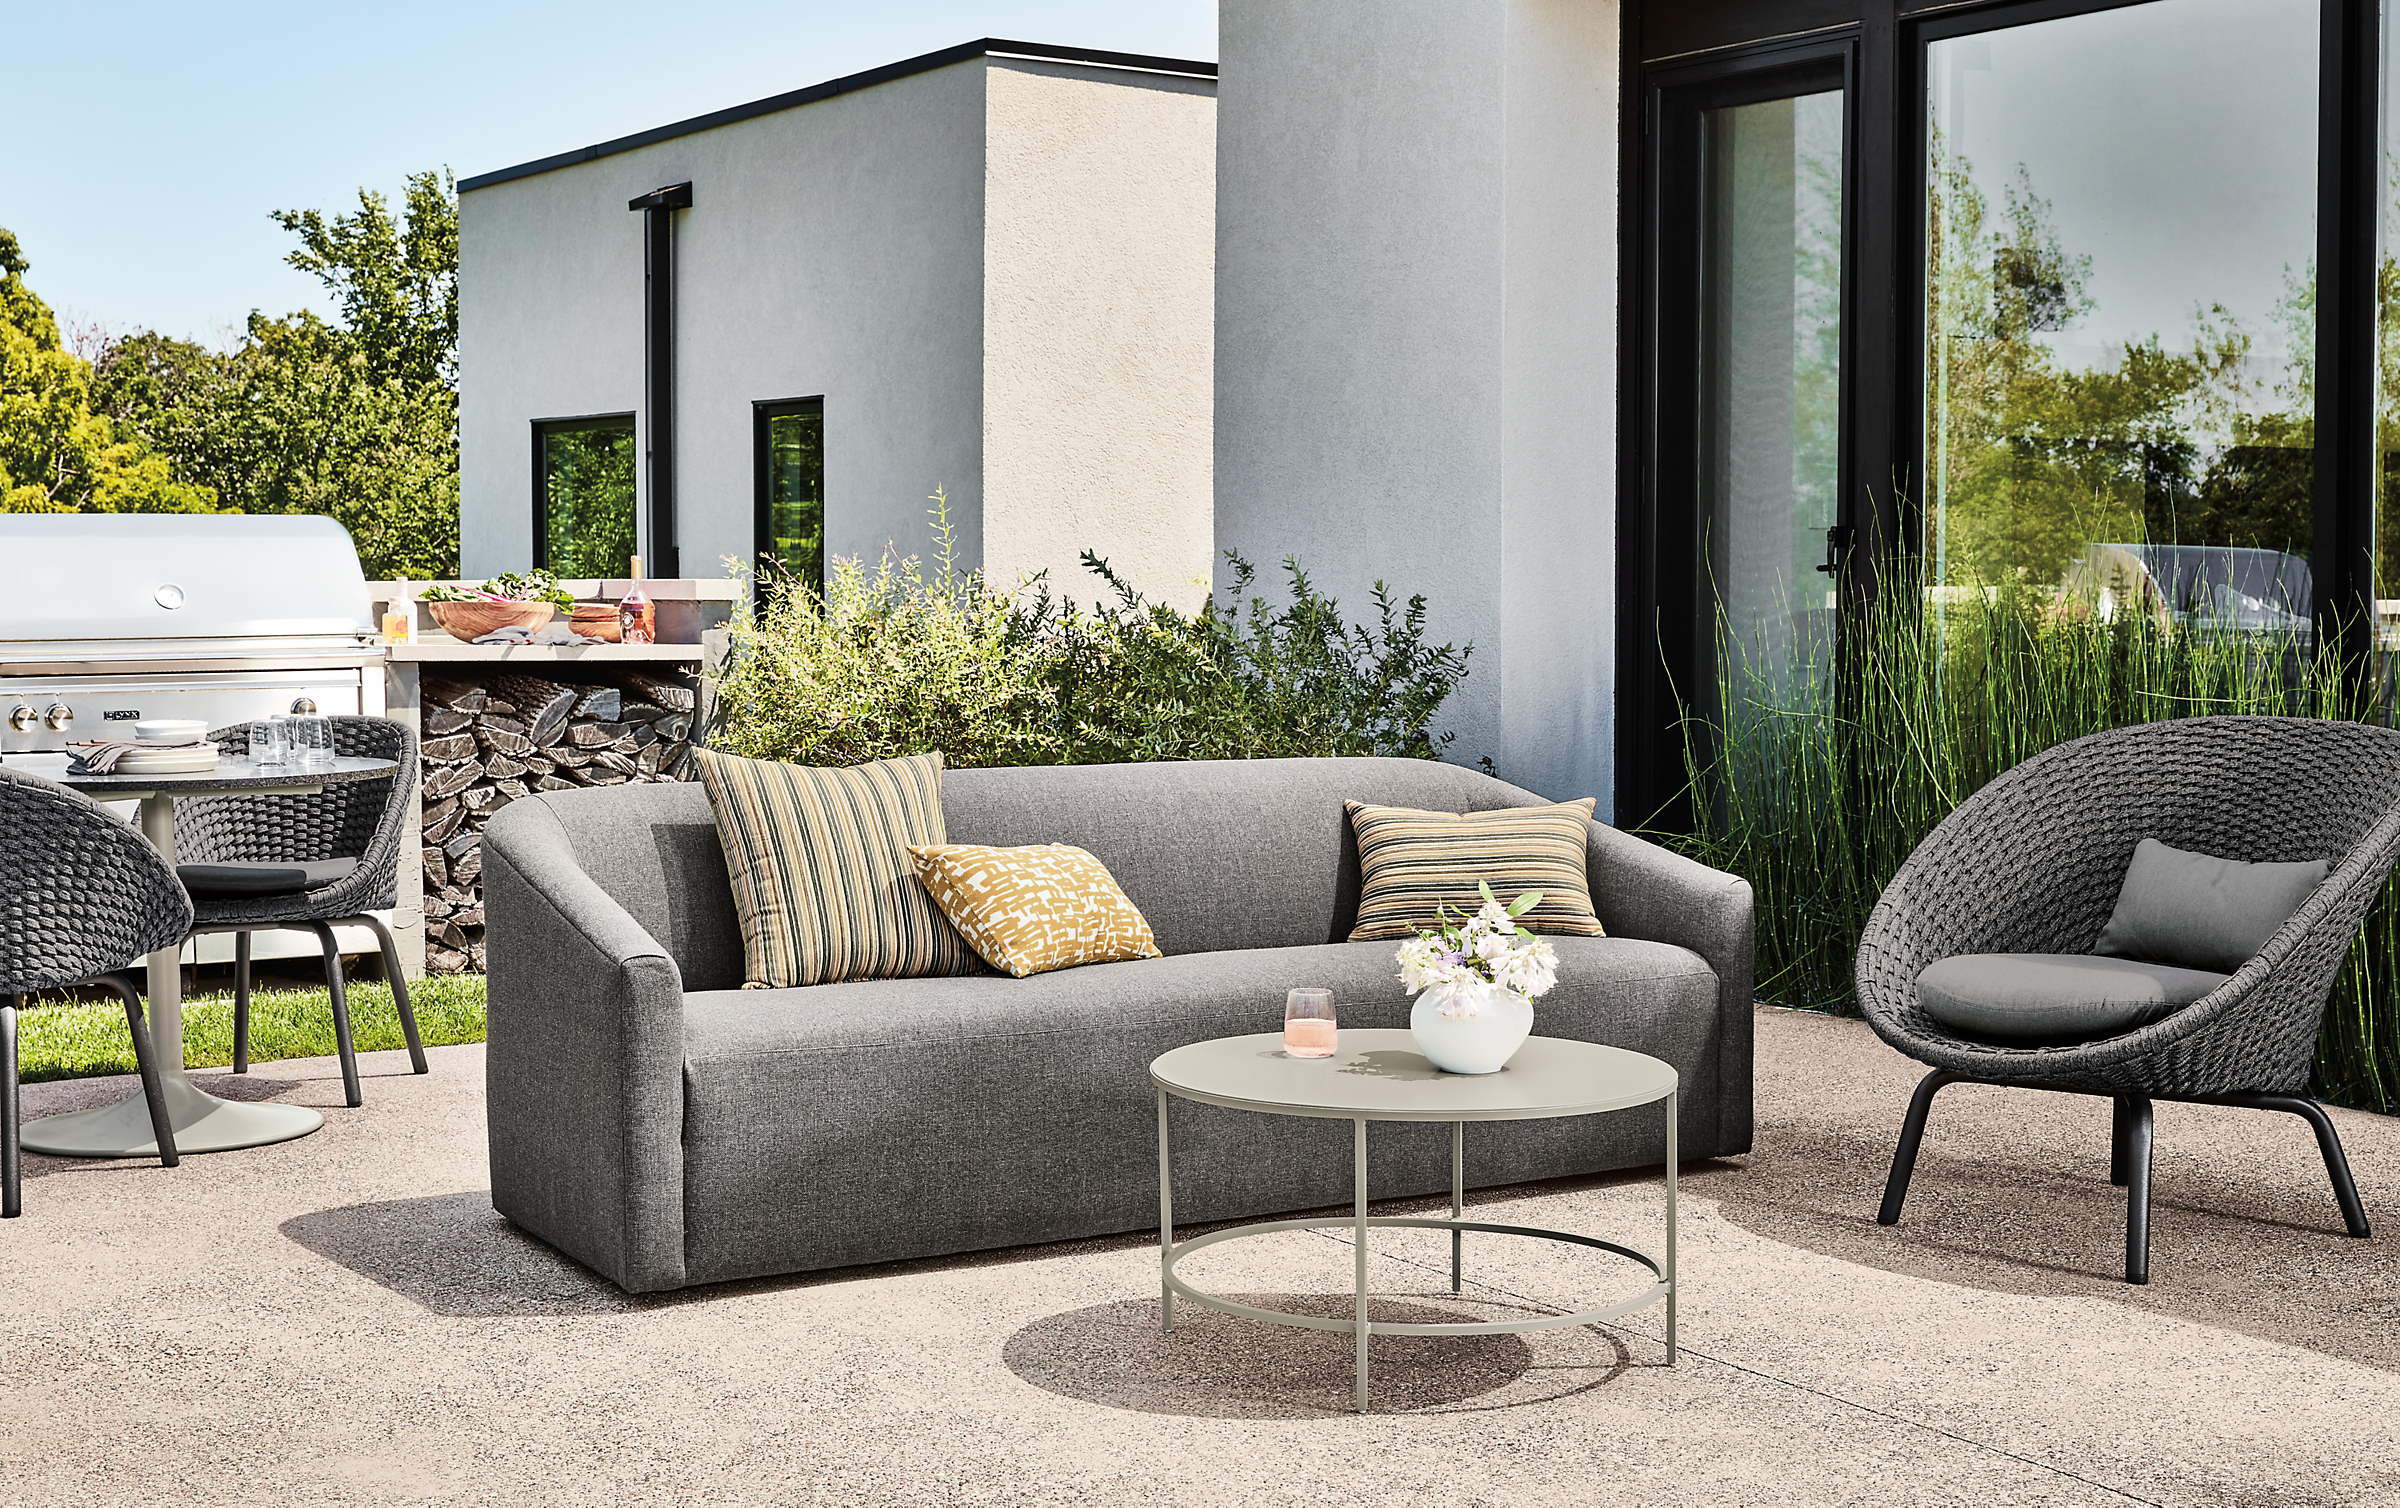 Outdoor patio with Arris sofa in Mist Charcoal, Flet Chair in slate and Slim coffee table in taupe.